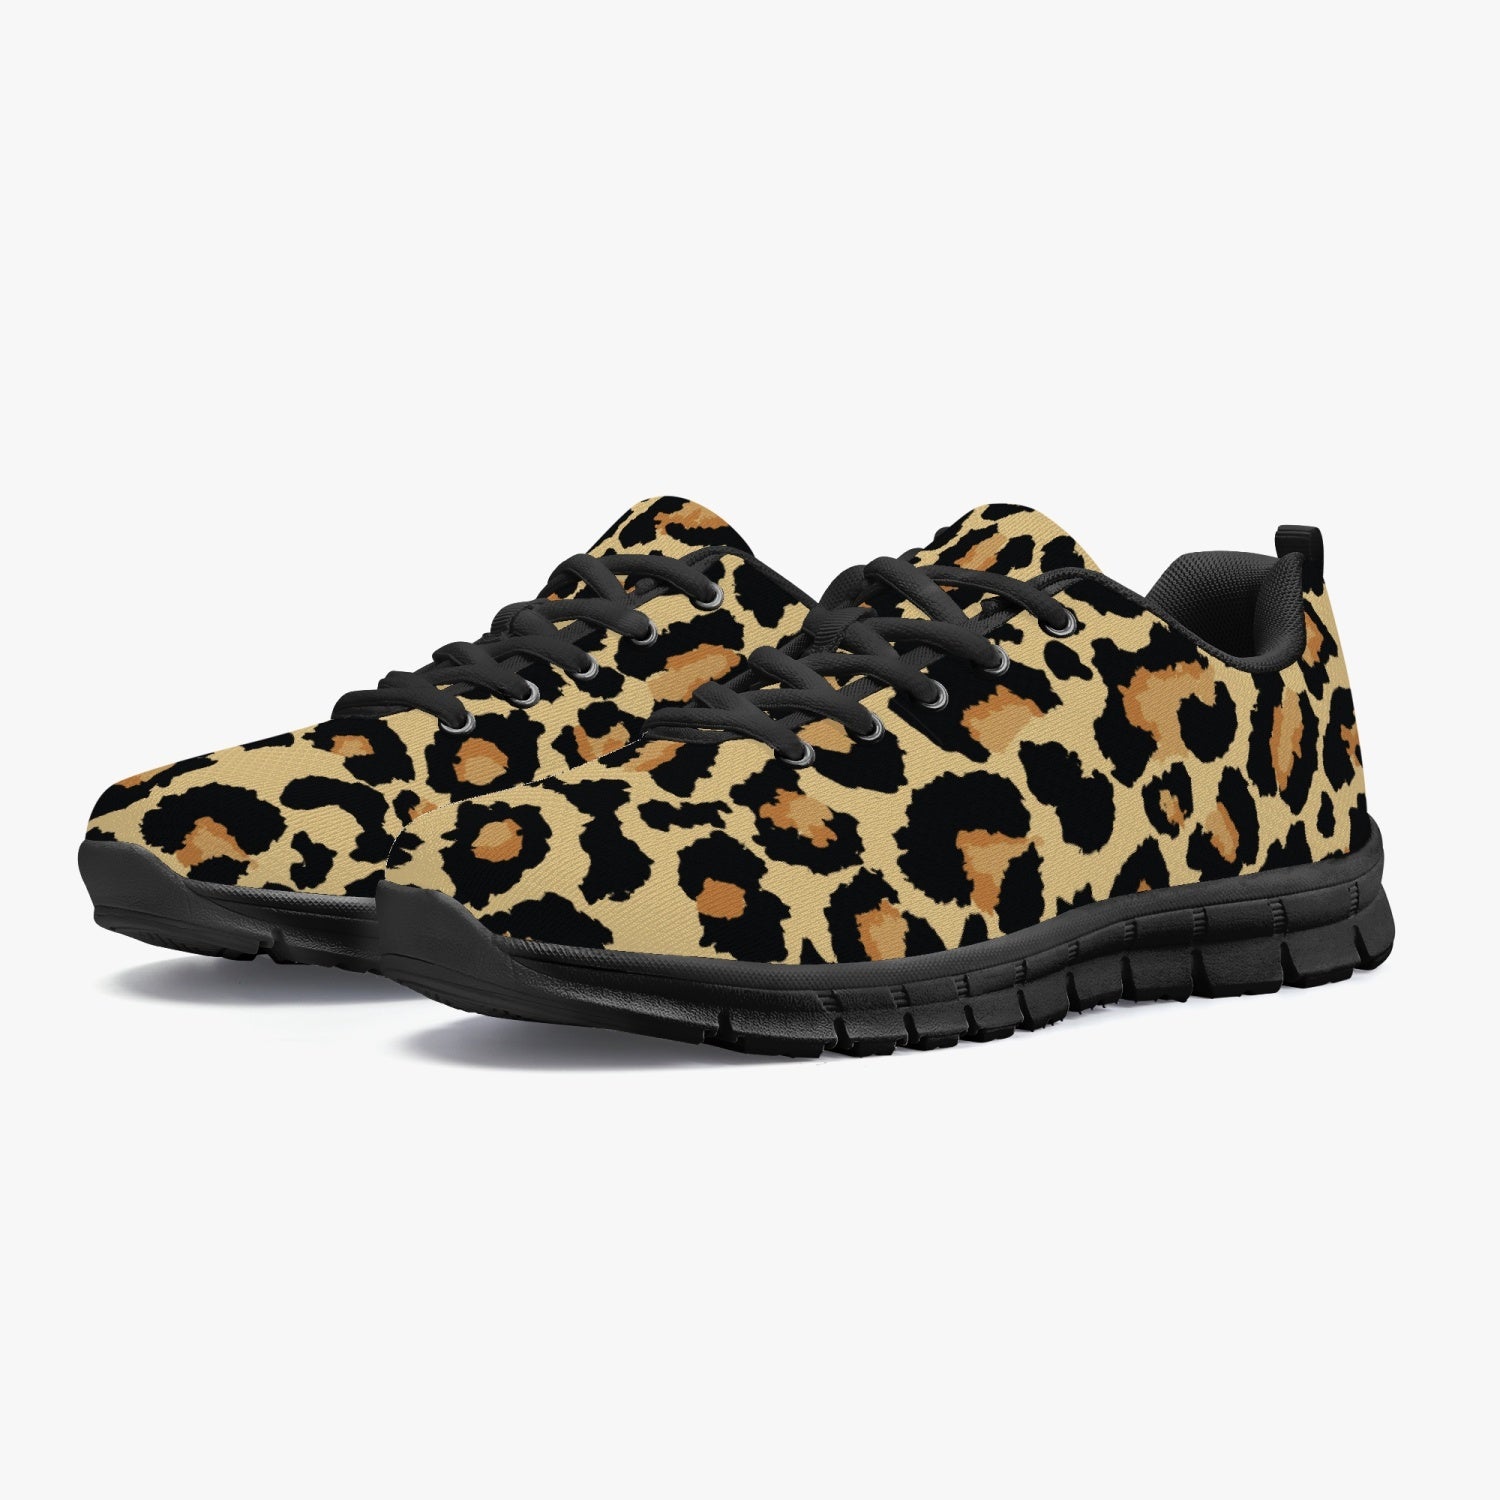 Women's Wild Animal Leopard Cheetah Full Print Workout Gym Running Sneakers Overview